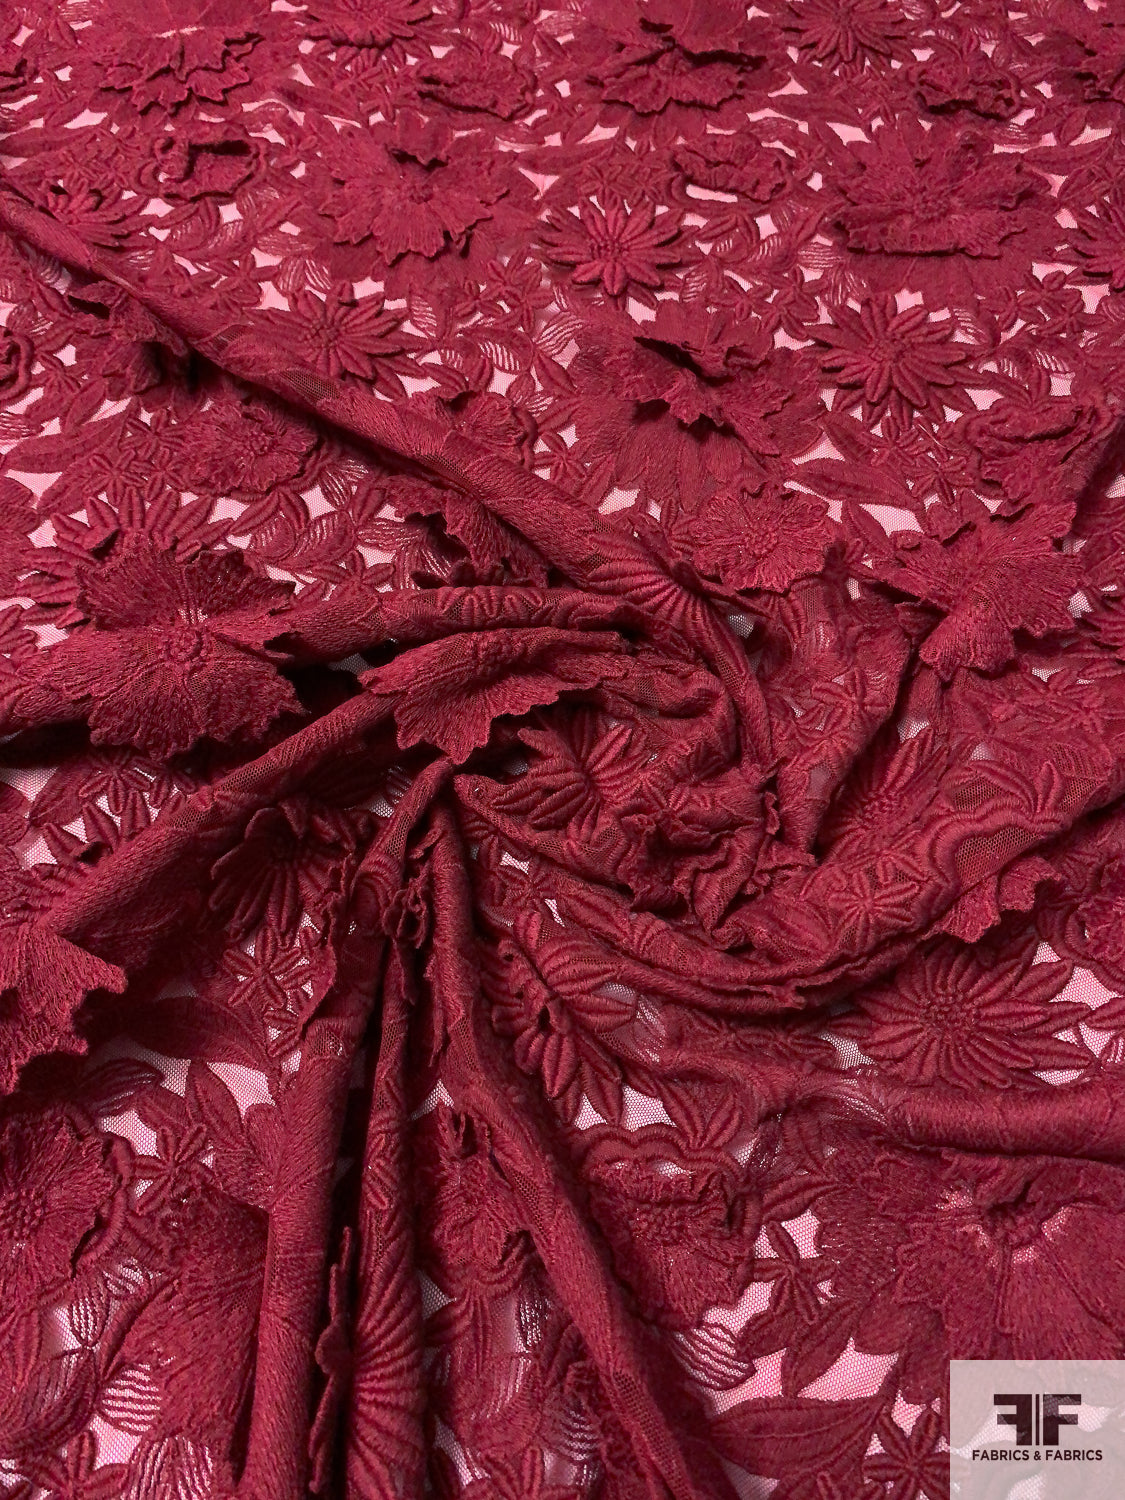 3D Floral Heavily Embroidered Tulle - Maroon